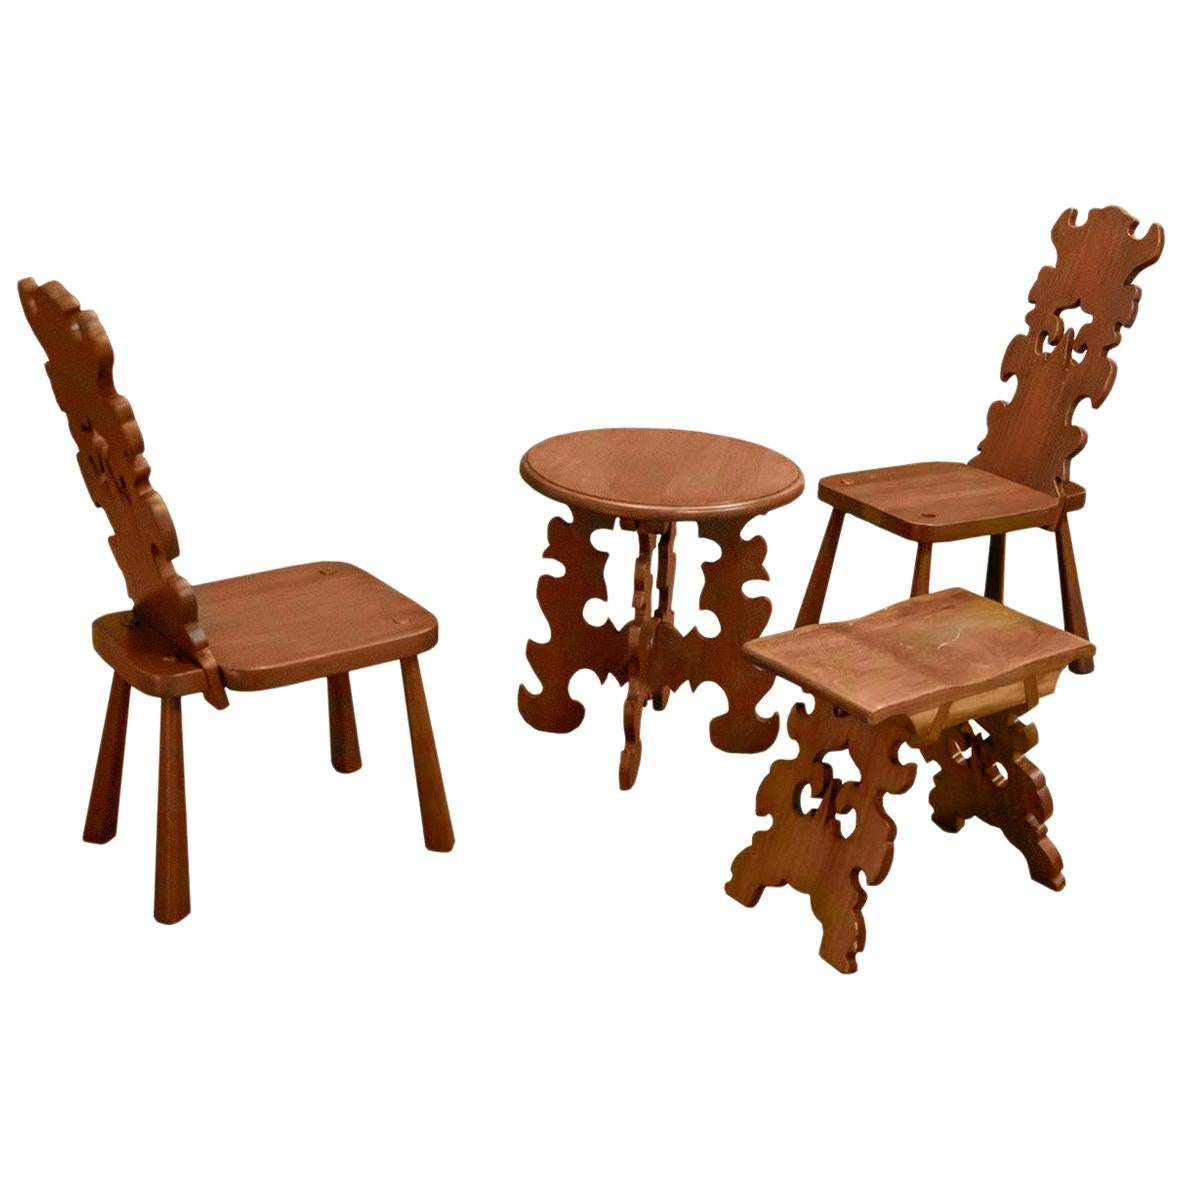 Set of Two Chairs, a Round Table and a Seat Bench, Made in Wood by Don Shoemaker